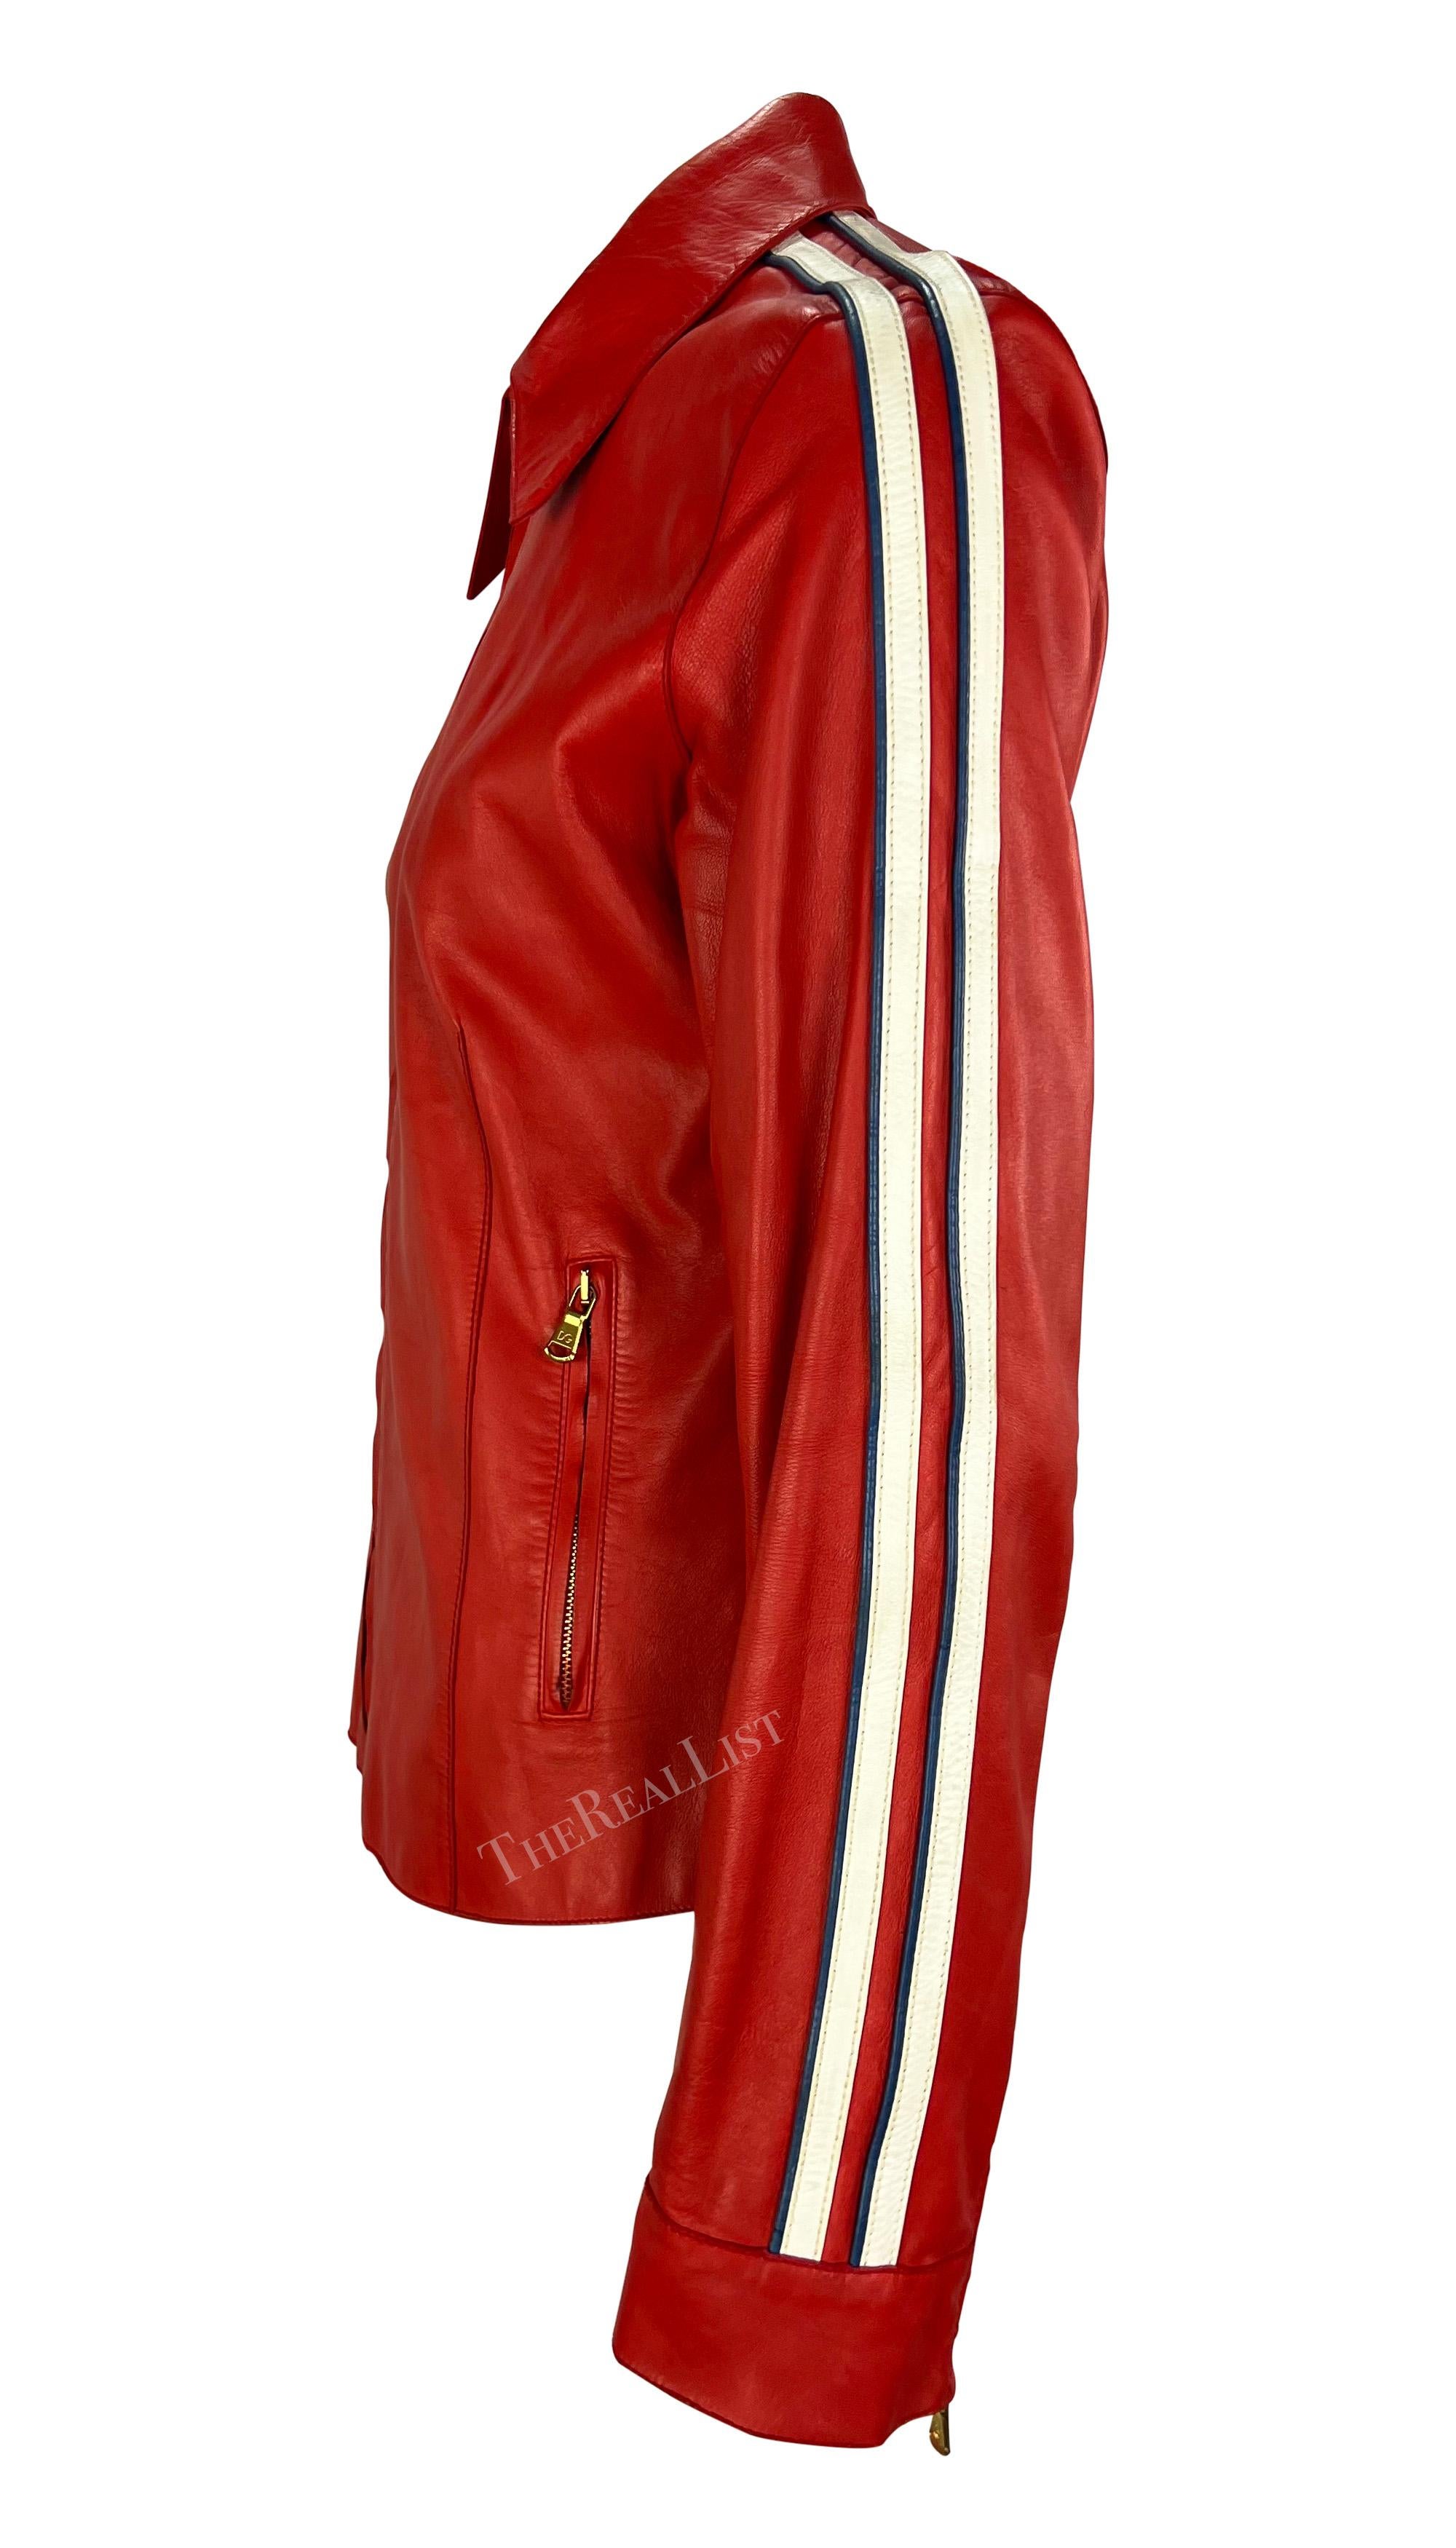 S/S 2001 Dolce & Gabbana Red Moto Style Leather Jacket For Sale 2